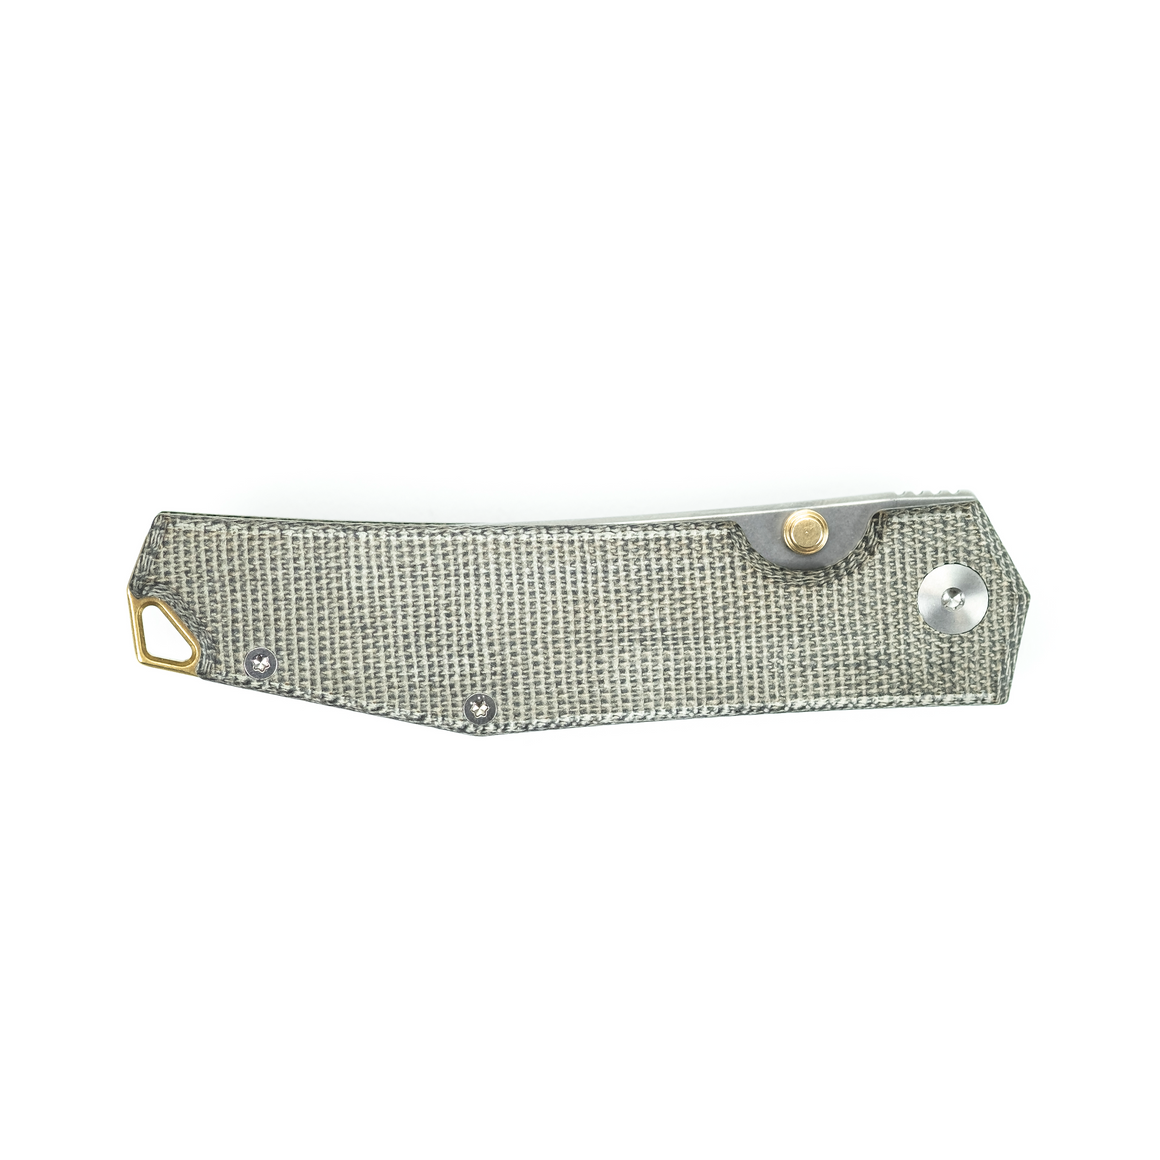 ACE Clyde - Green Canvas and Brass - Elmax Blade Steel, Stonewash finish - Green canvas micarta Handle - front